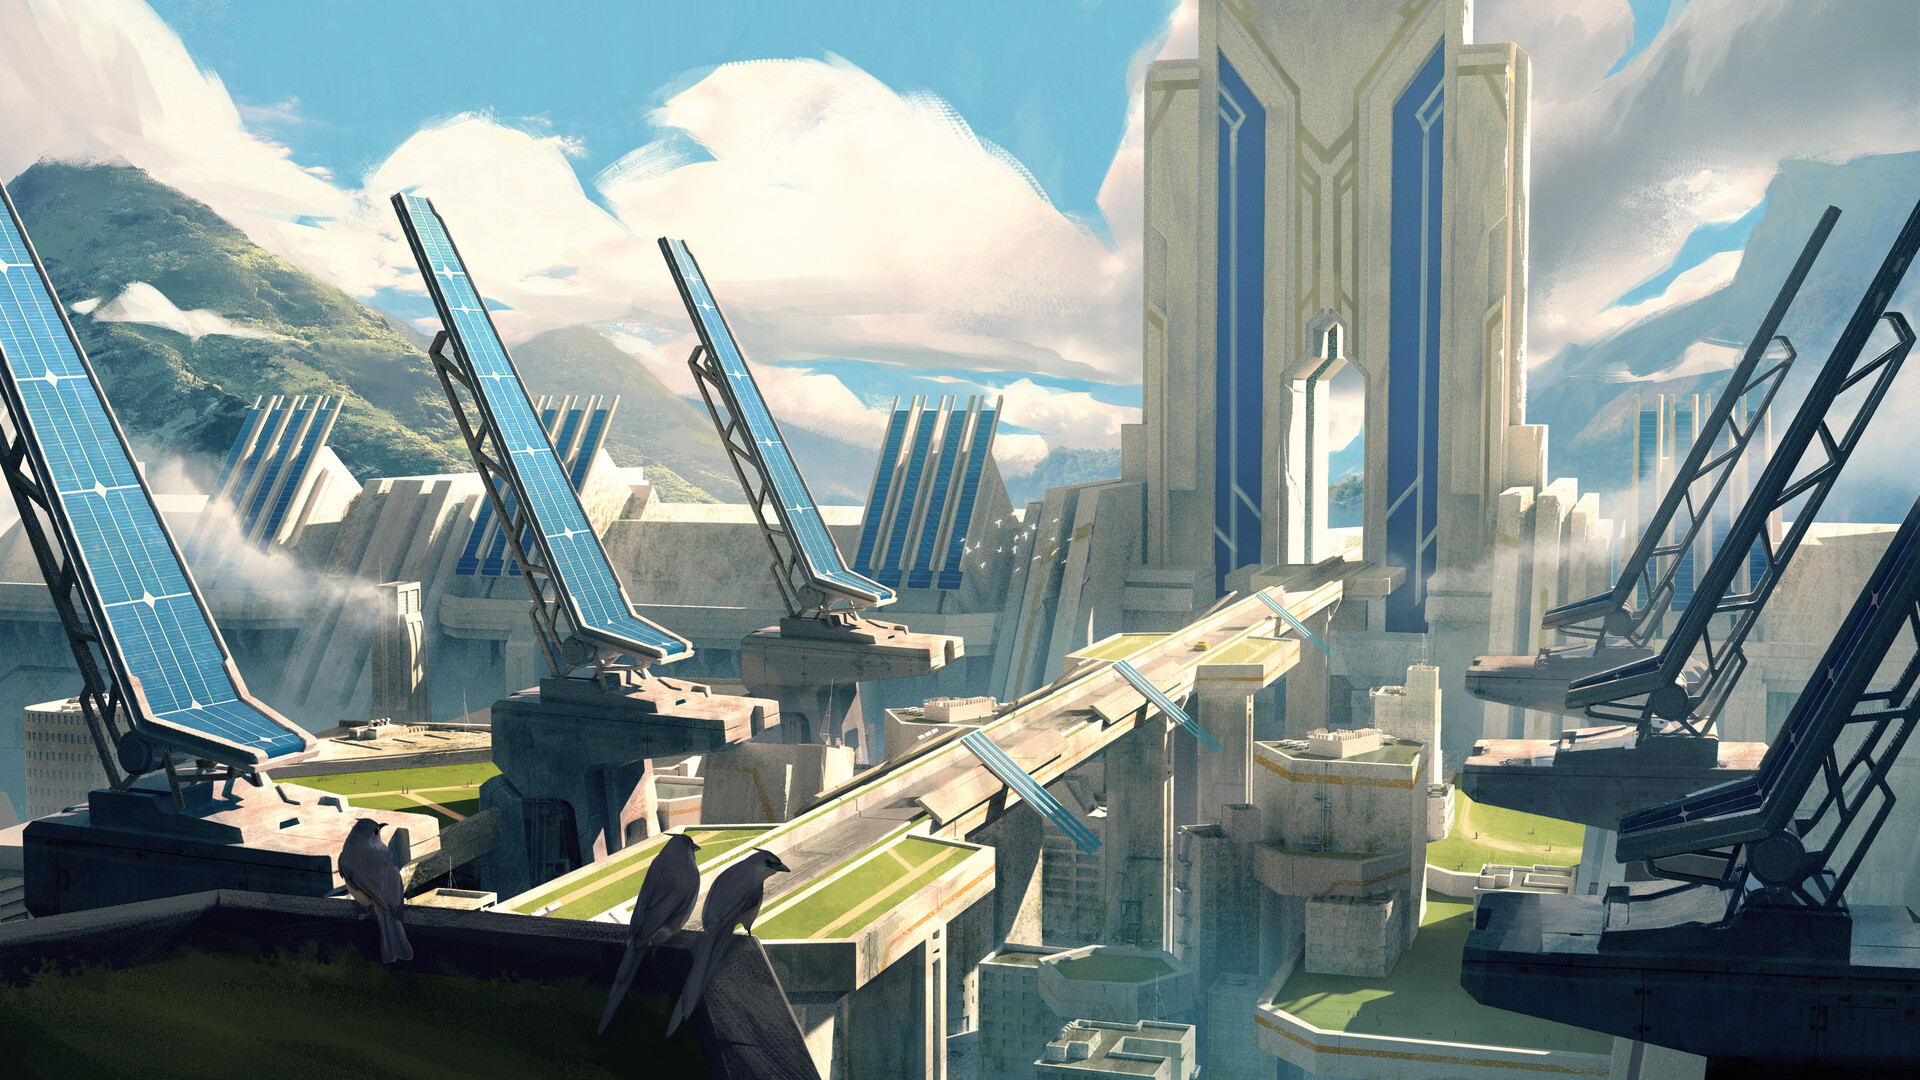 Earthbased.soul on X: One more view from our Solarpunk City. What should I  add? #solarpunk #worldbuilding  / X